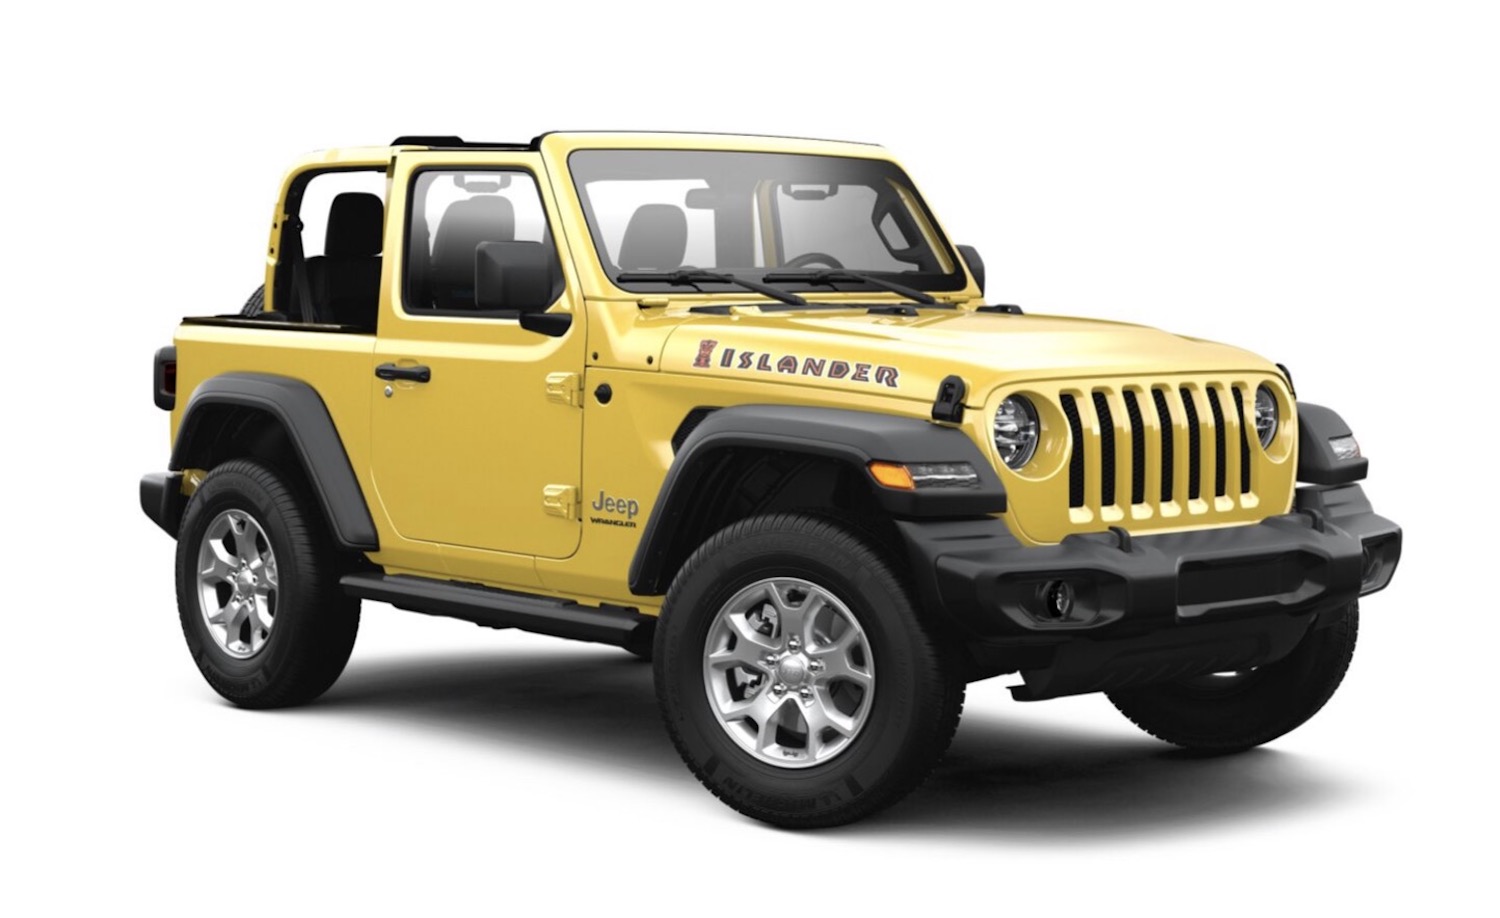 Jeep Wrangler Islander Edition Returns For 21 After 10 Year Absence